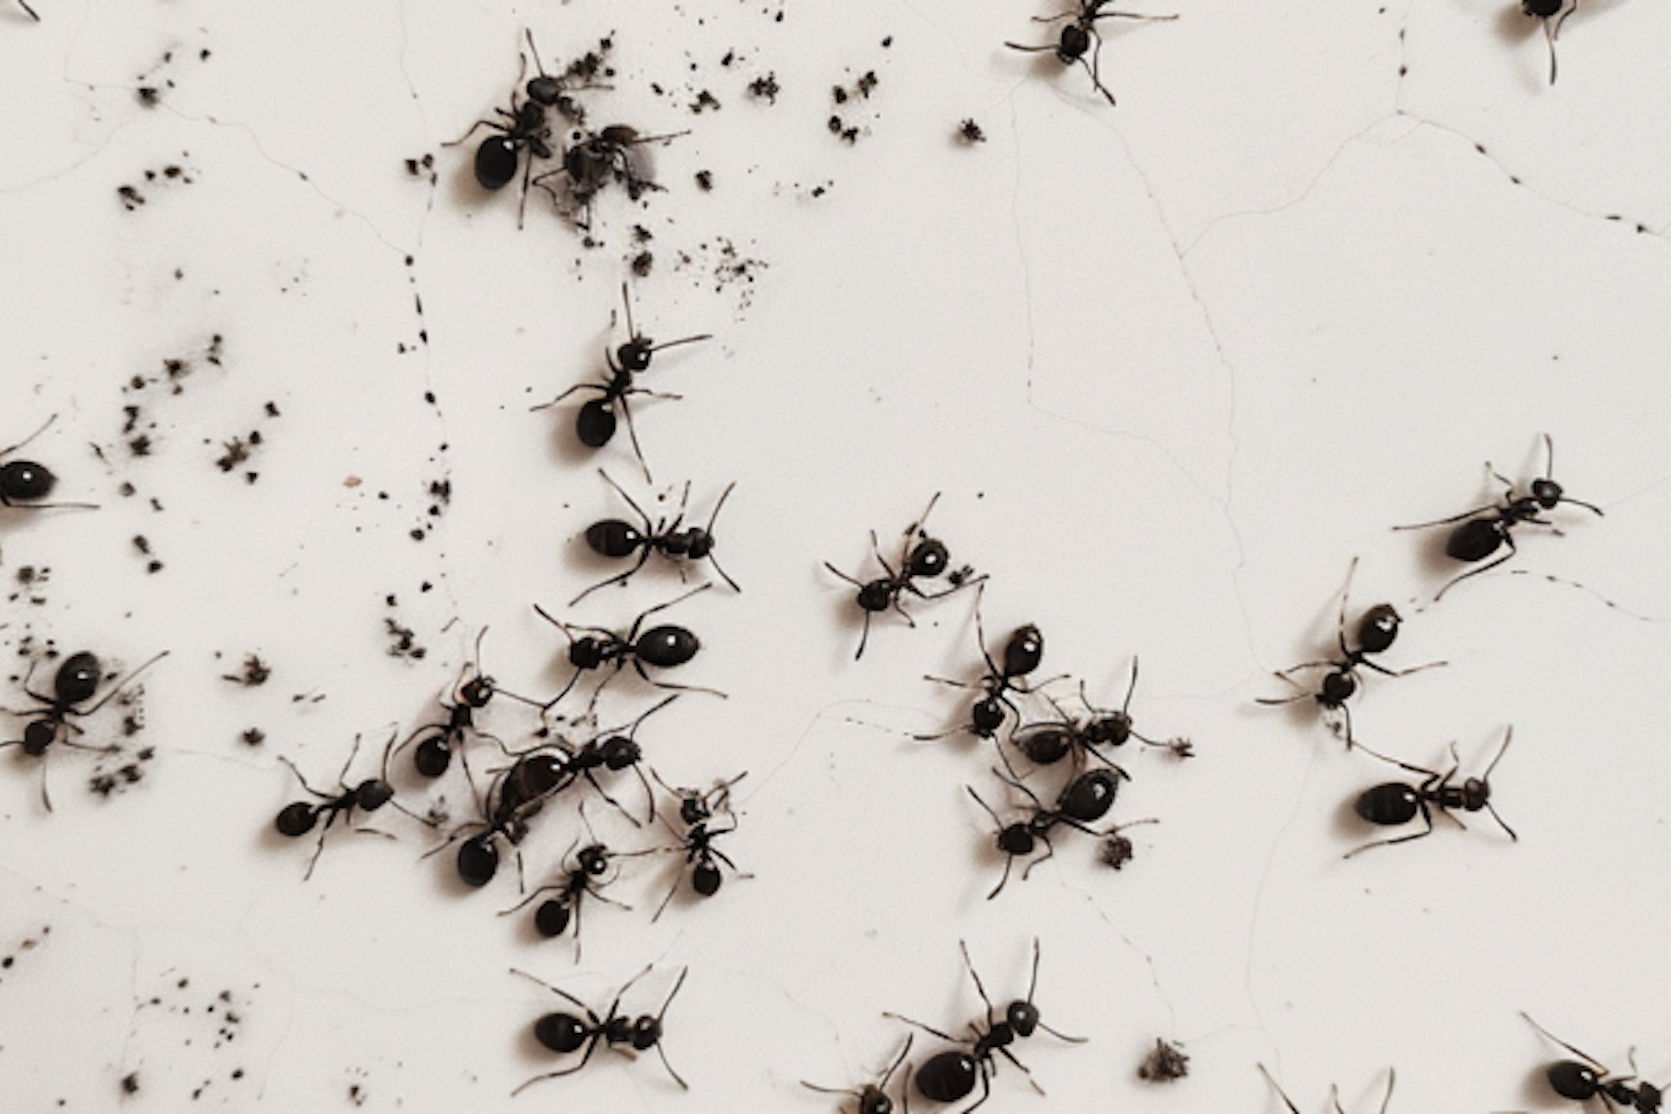 tiny black ant infestation can definitely be bothersome